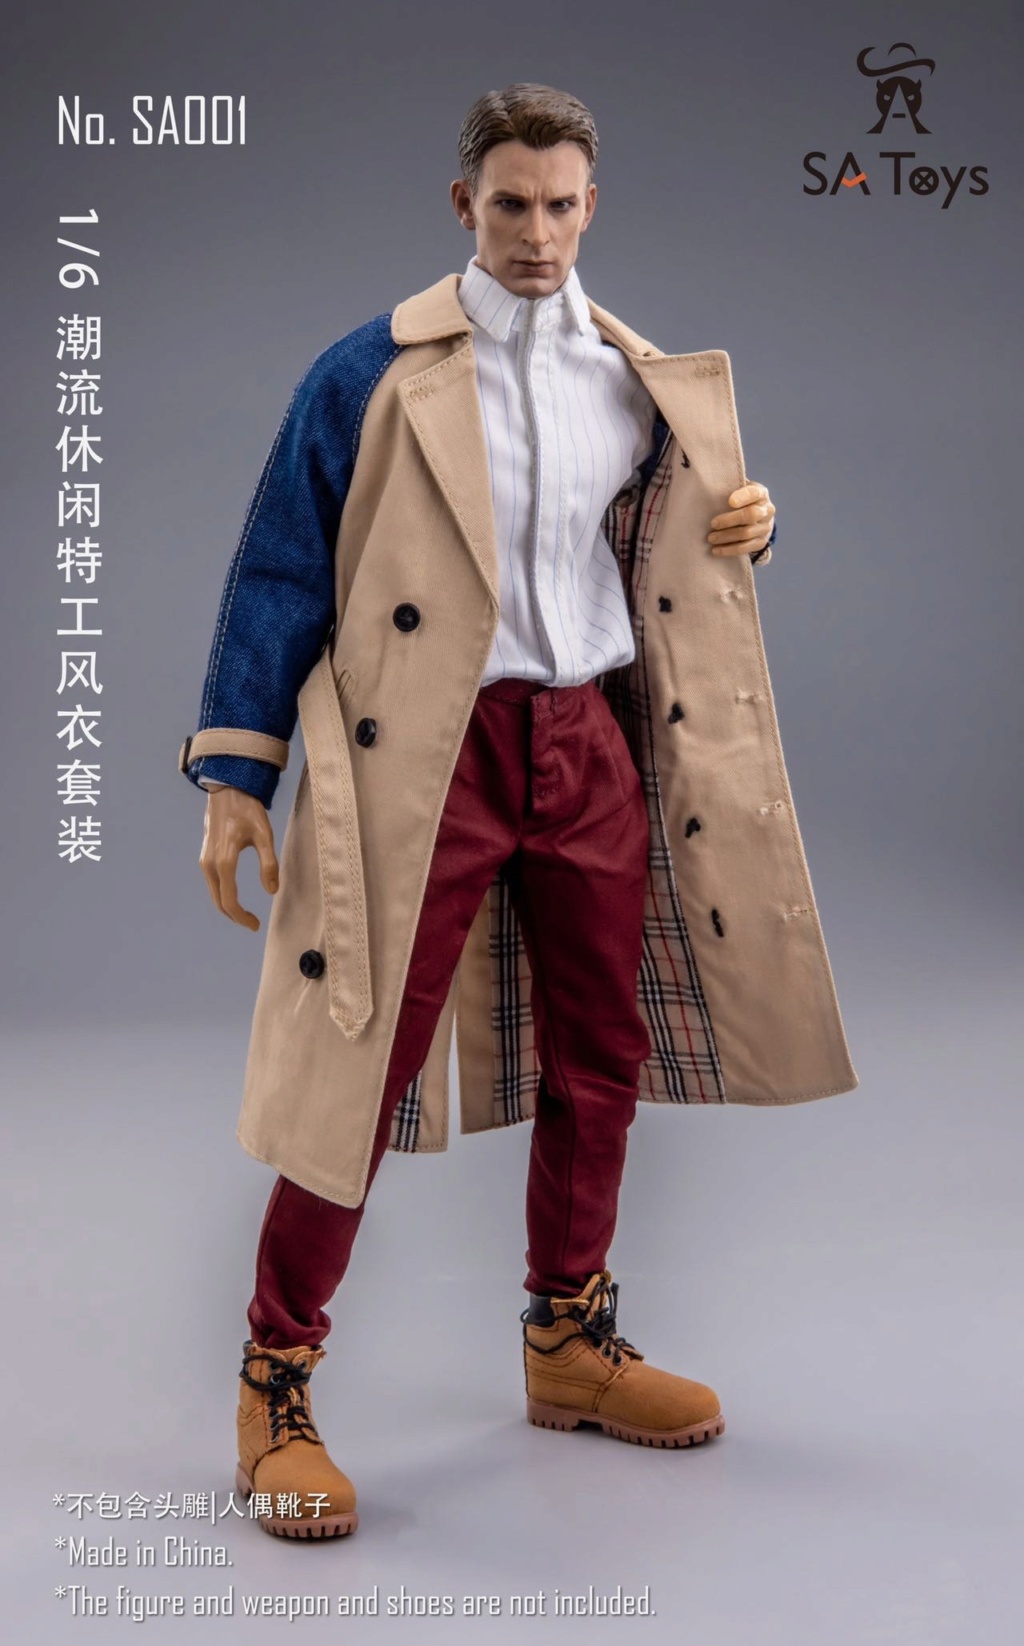 accessory - NEW PRODUCT: SA Toys: 1/6 Trend Casual Agent Trench coat set (SA001) 15314111